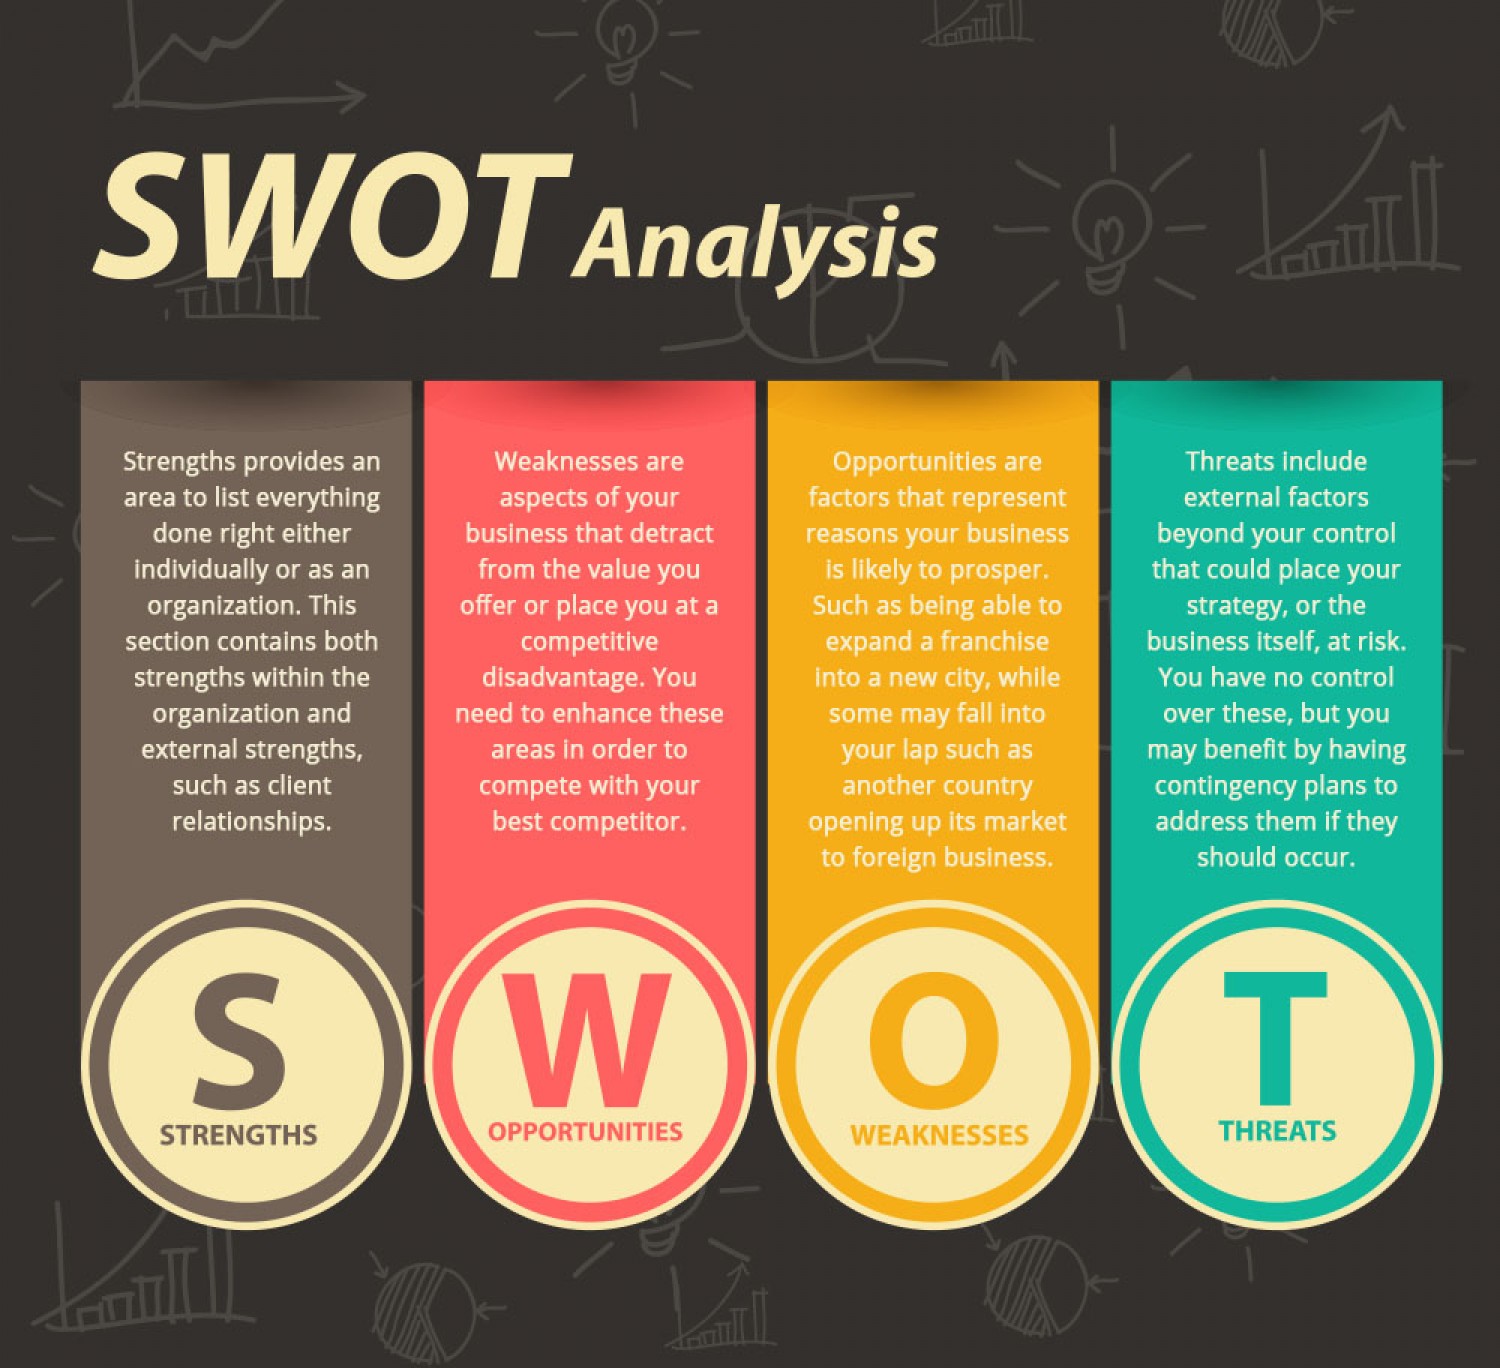 Planning For Growth: How To Scale Up Using A SWOT Analysis